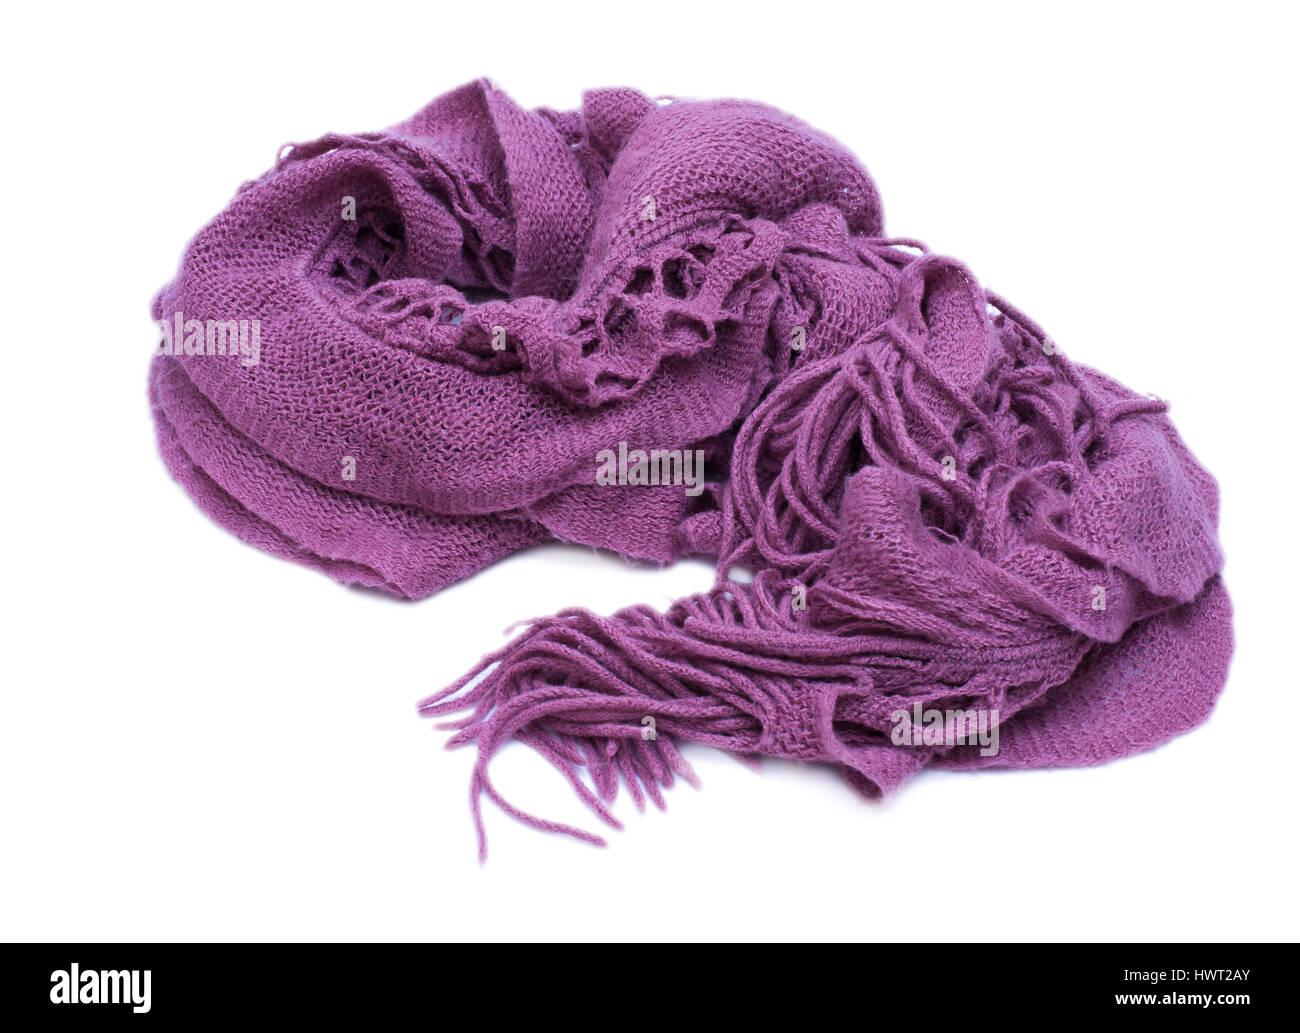 Violet knitted woolen scarf isolated on white background Stock Photo